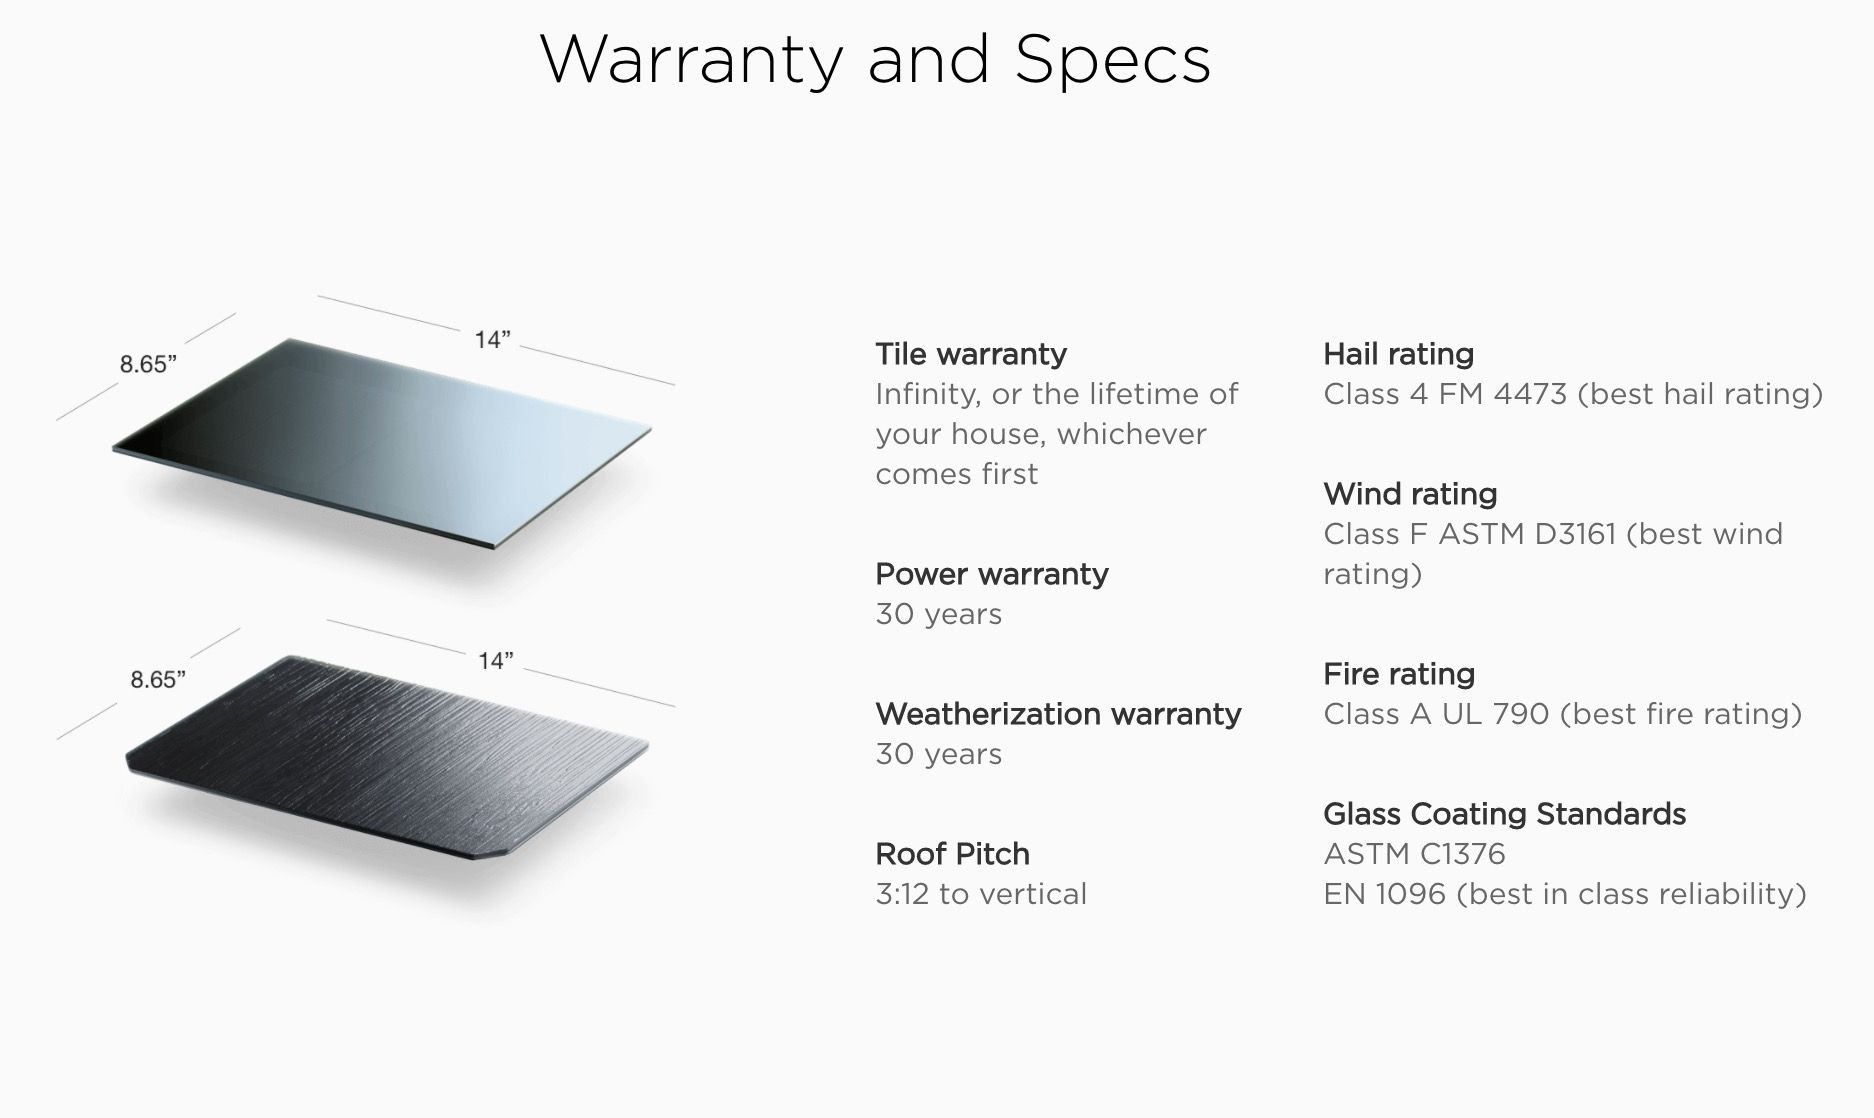 tesla solar roof everything you need to know image 4